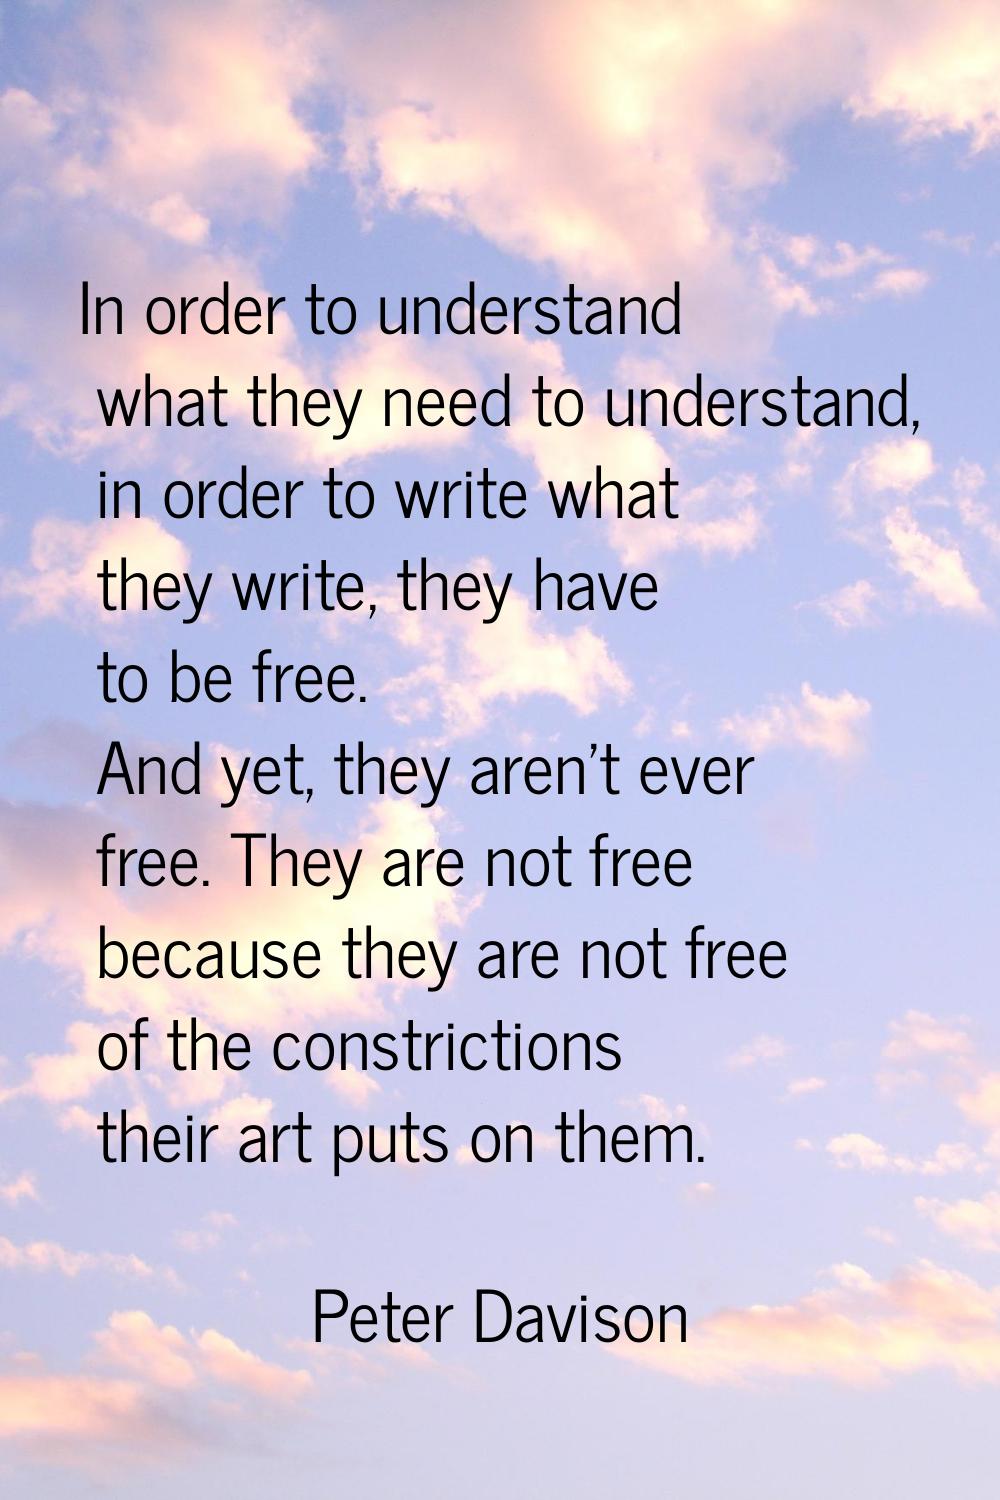 In order to understand what they need to understand, in order to write what they write, they have t